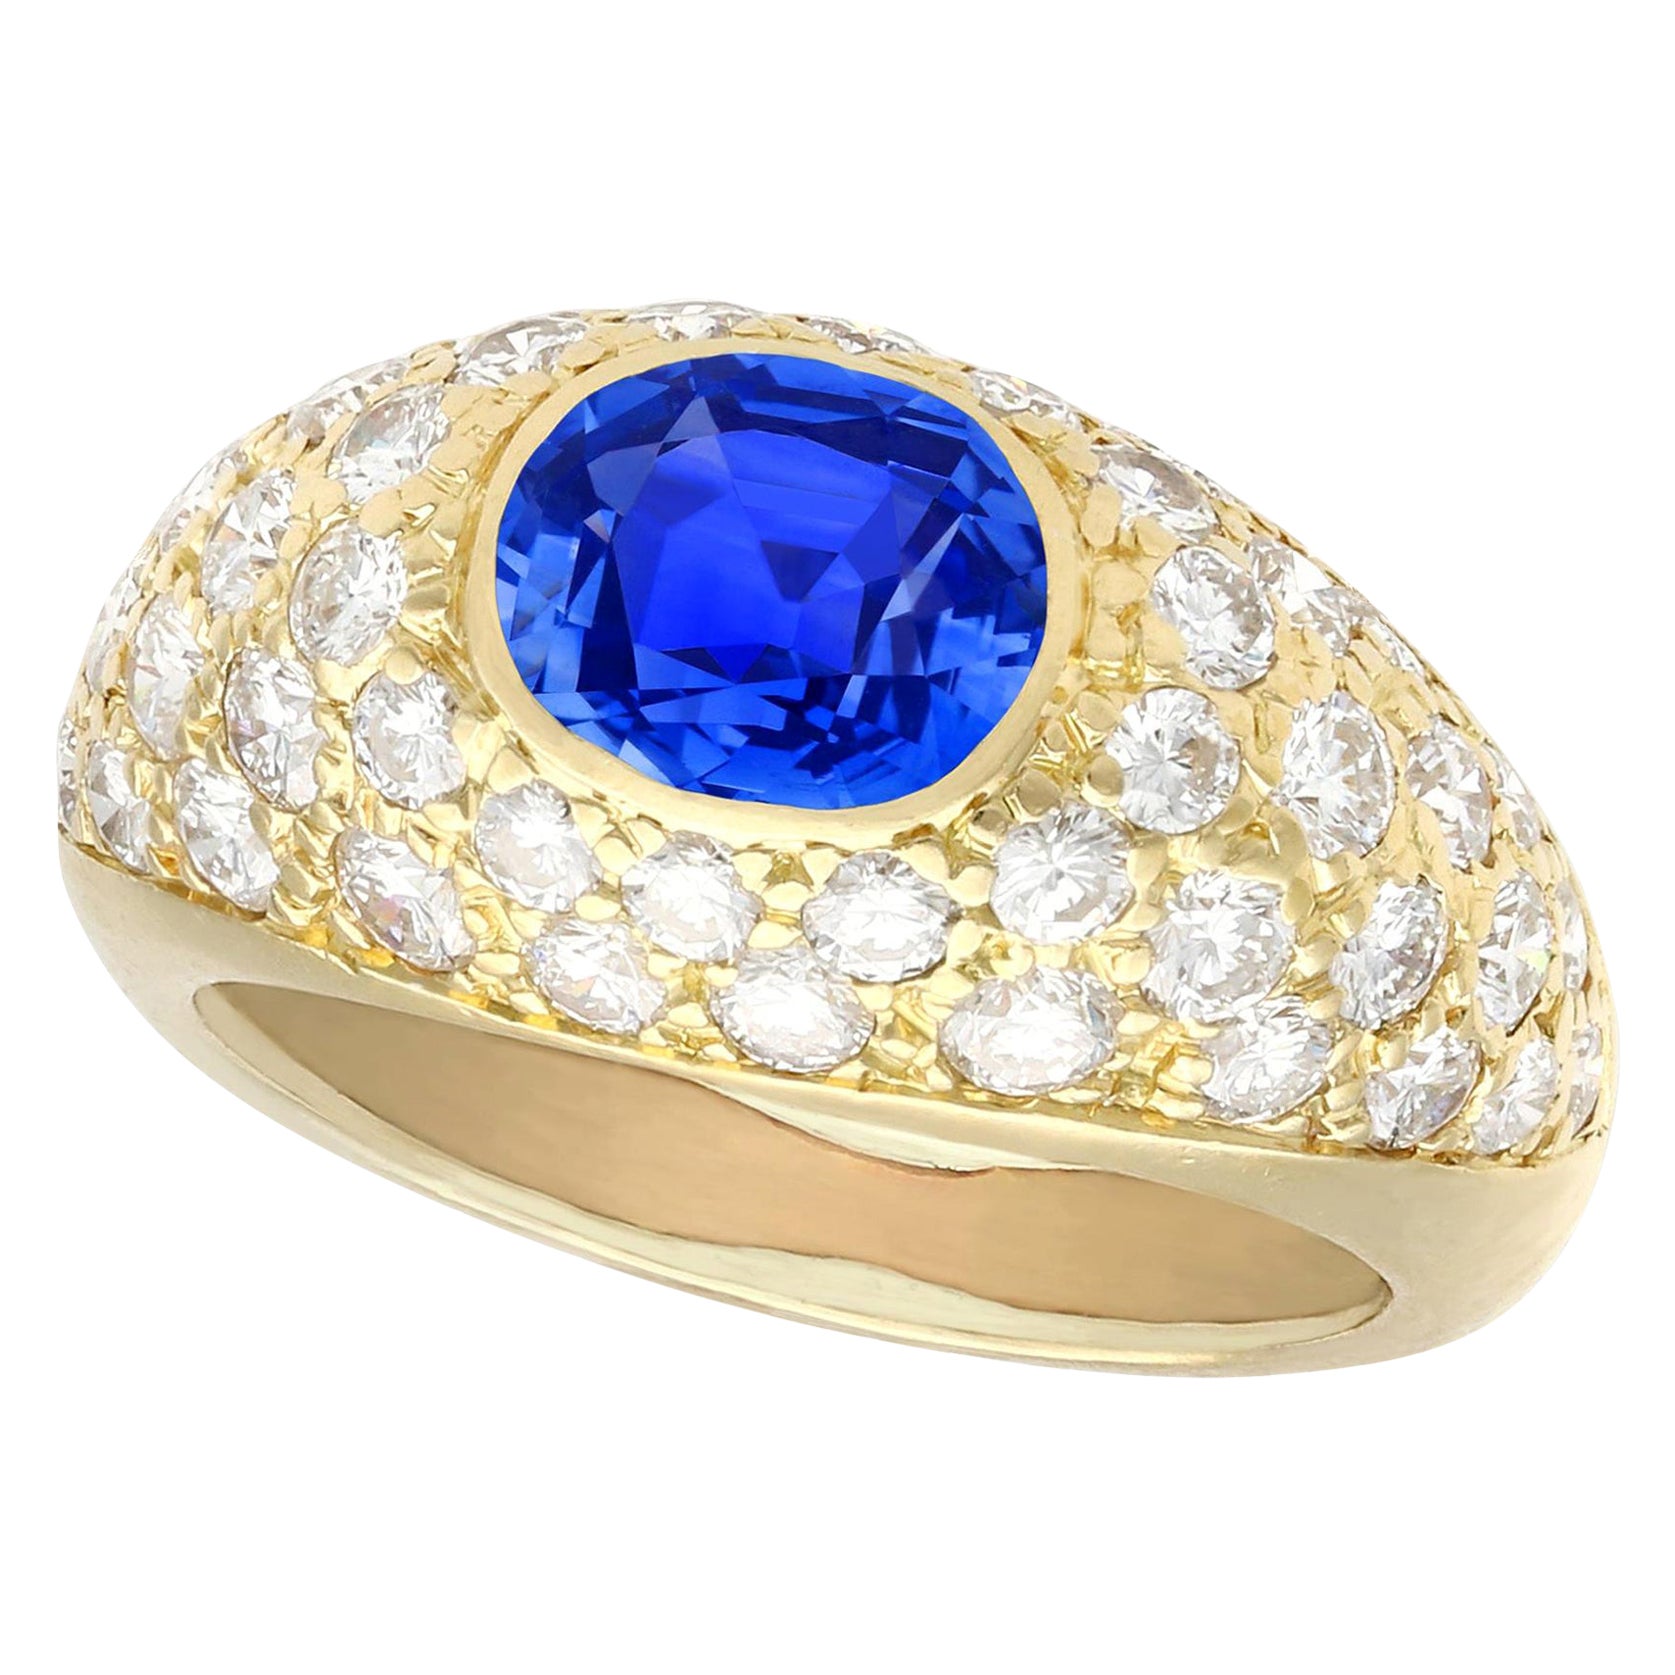 1.60 Carat Oval Cut Sapphire 1.20 Carat Diamond 18k Yellow Gold Cocktail Ring For Sale